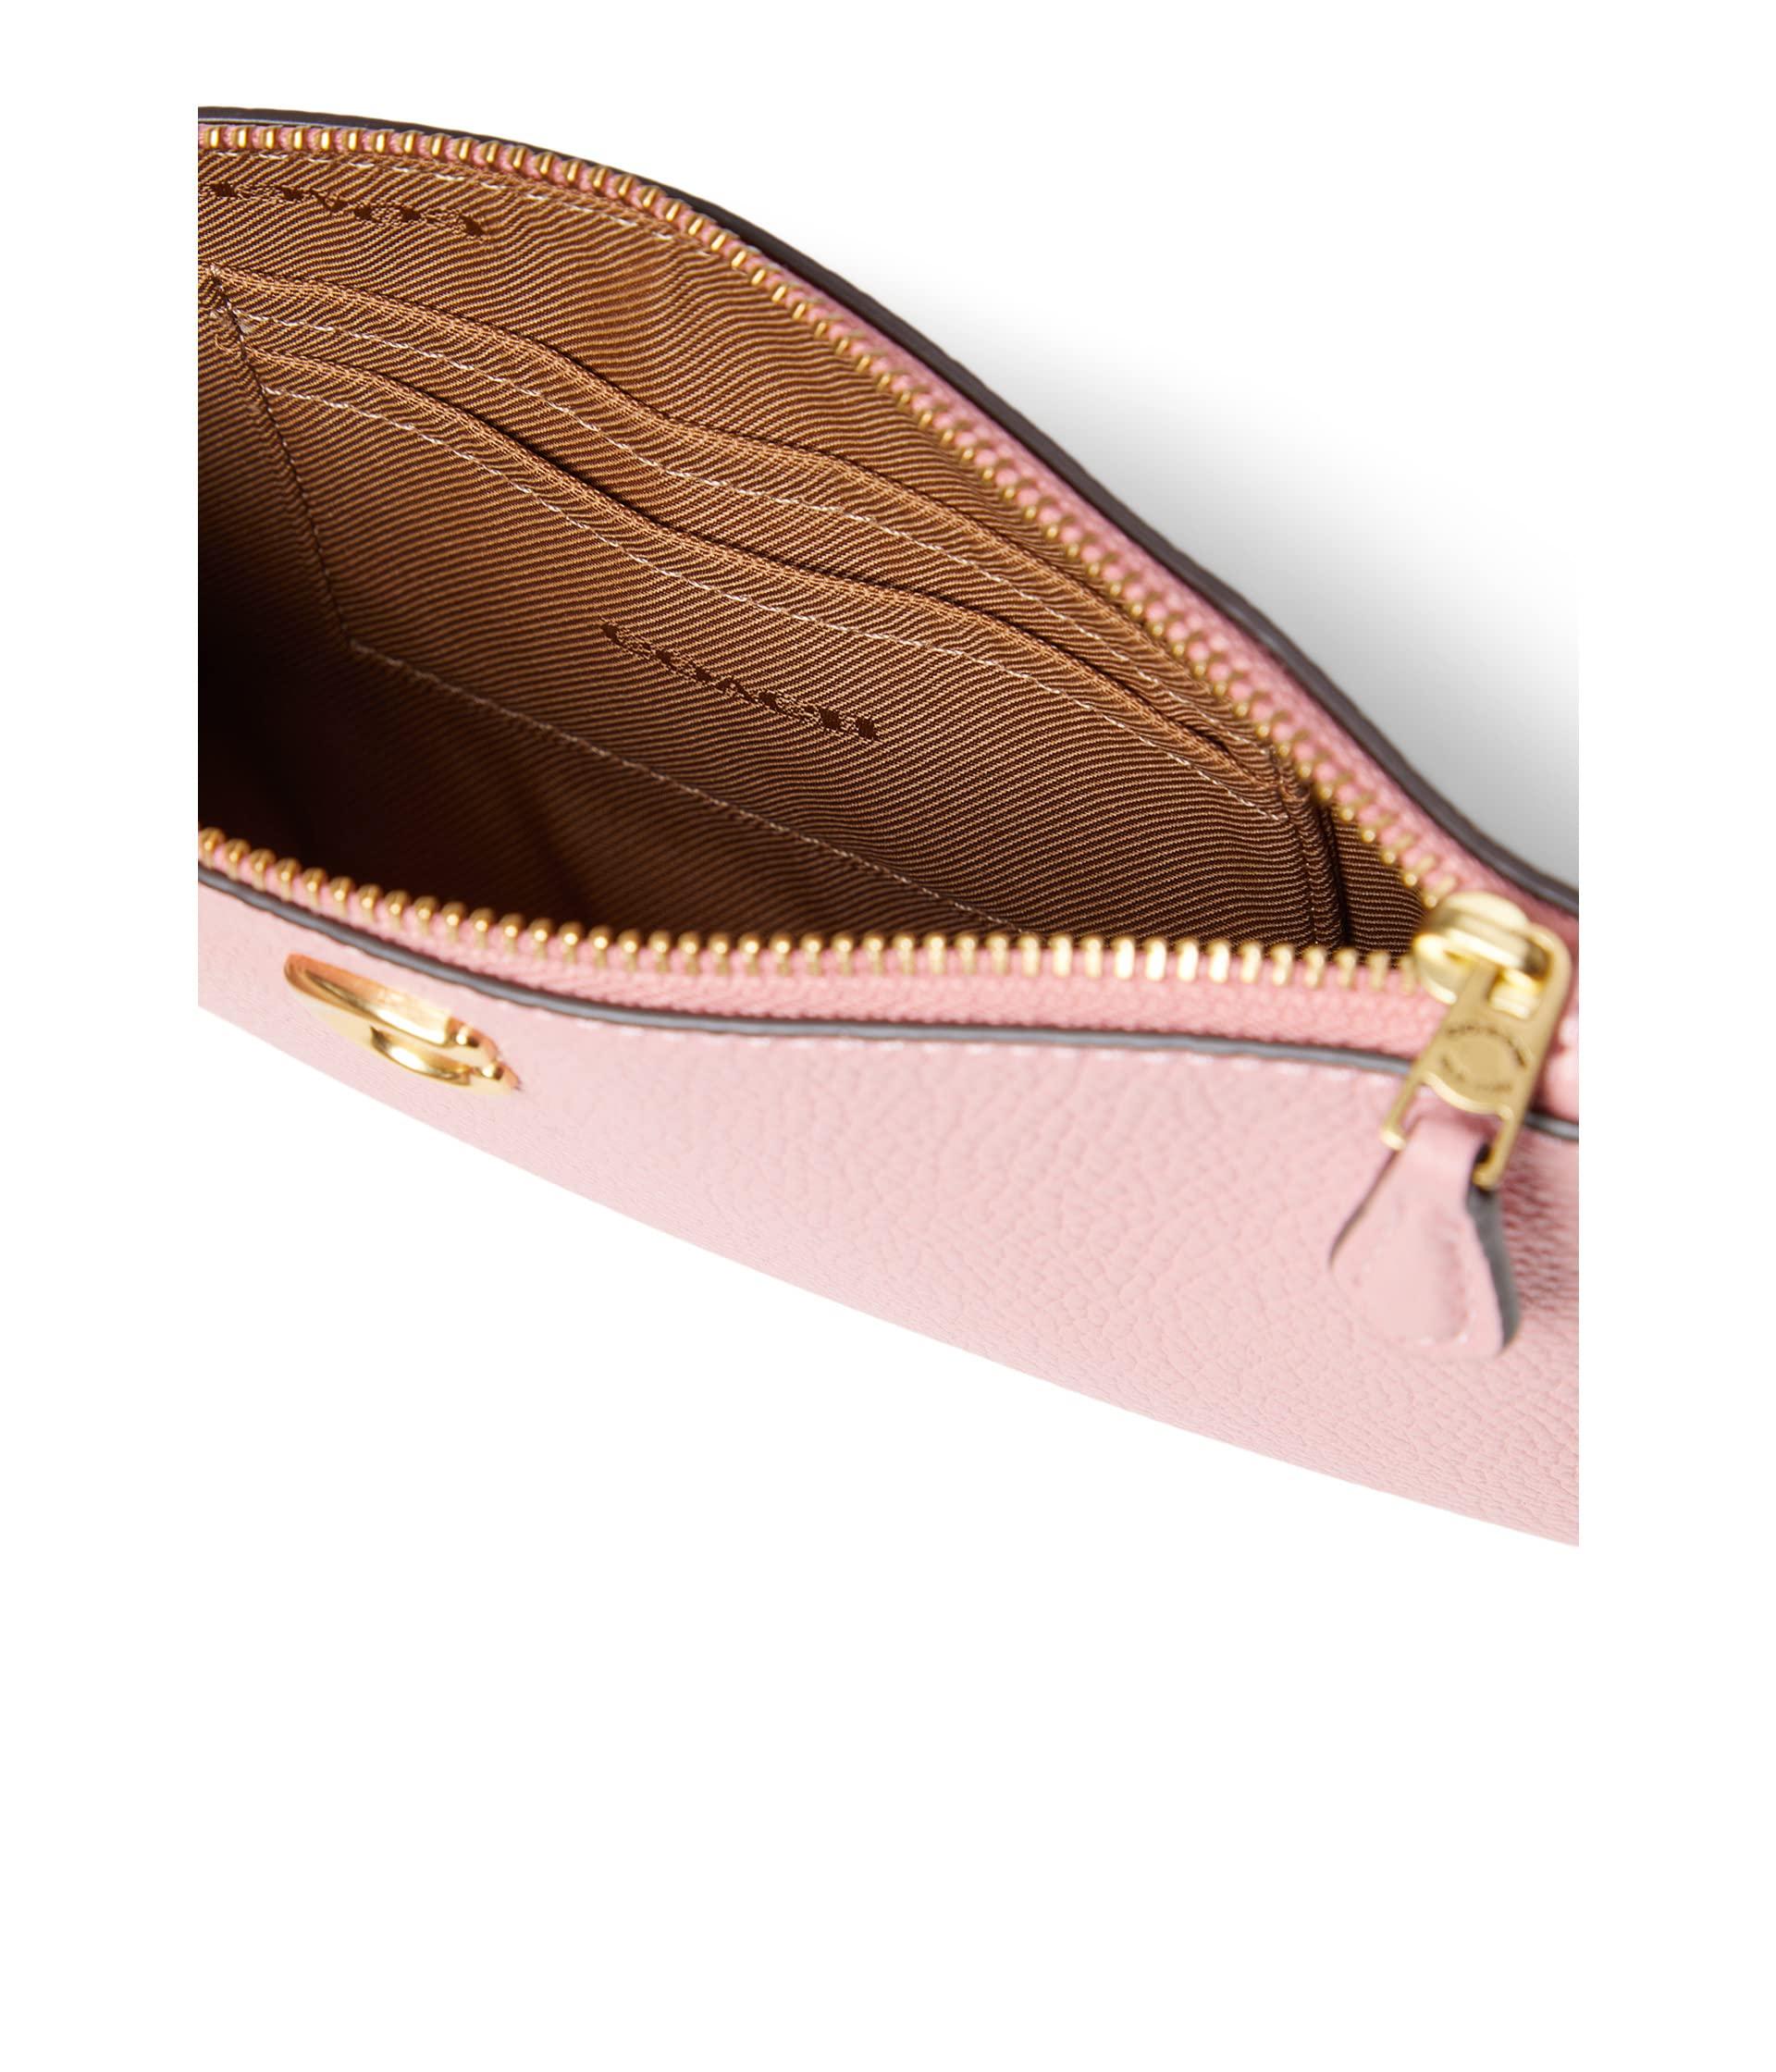 COACH Small Pebble Pink Leather Wristlet